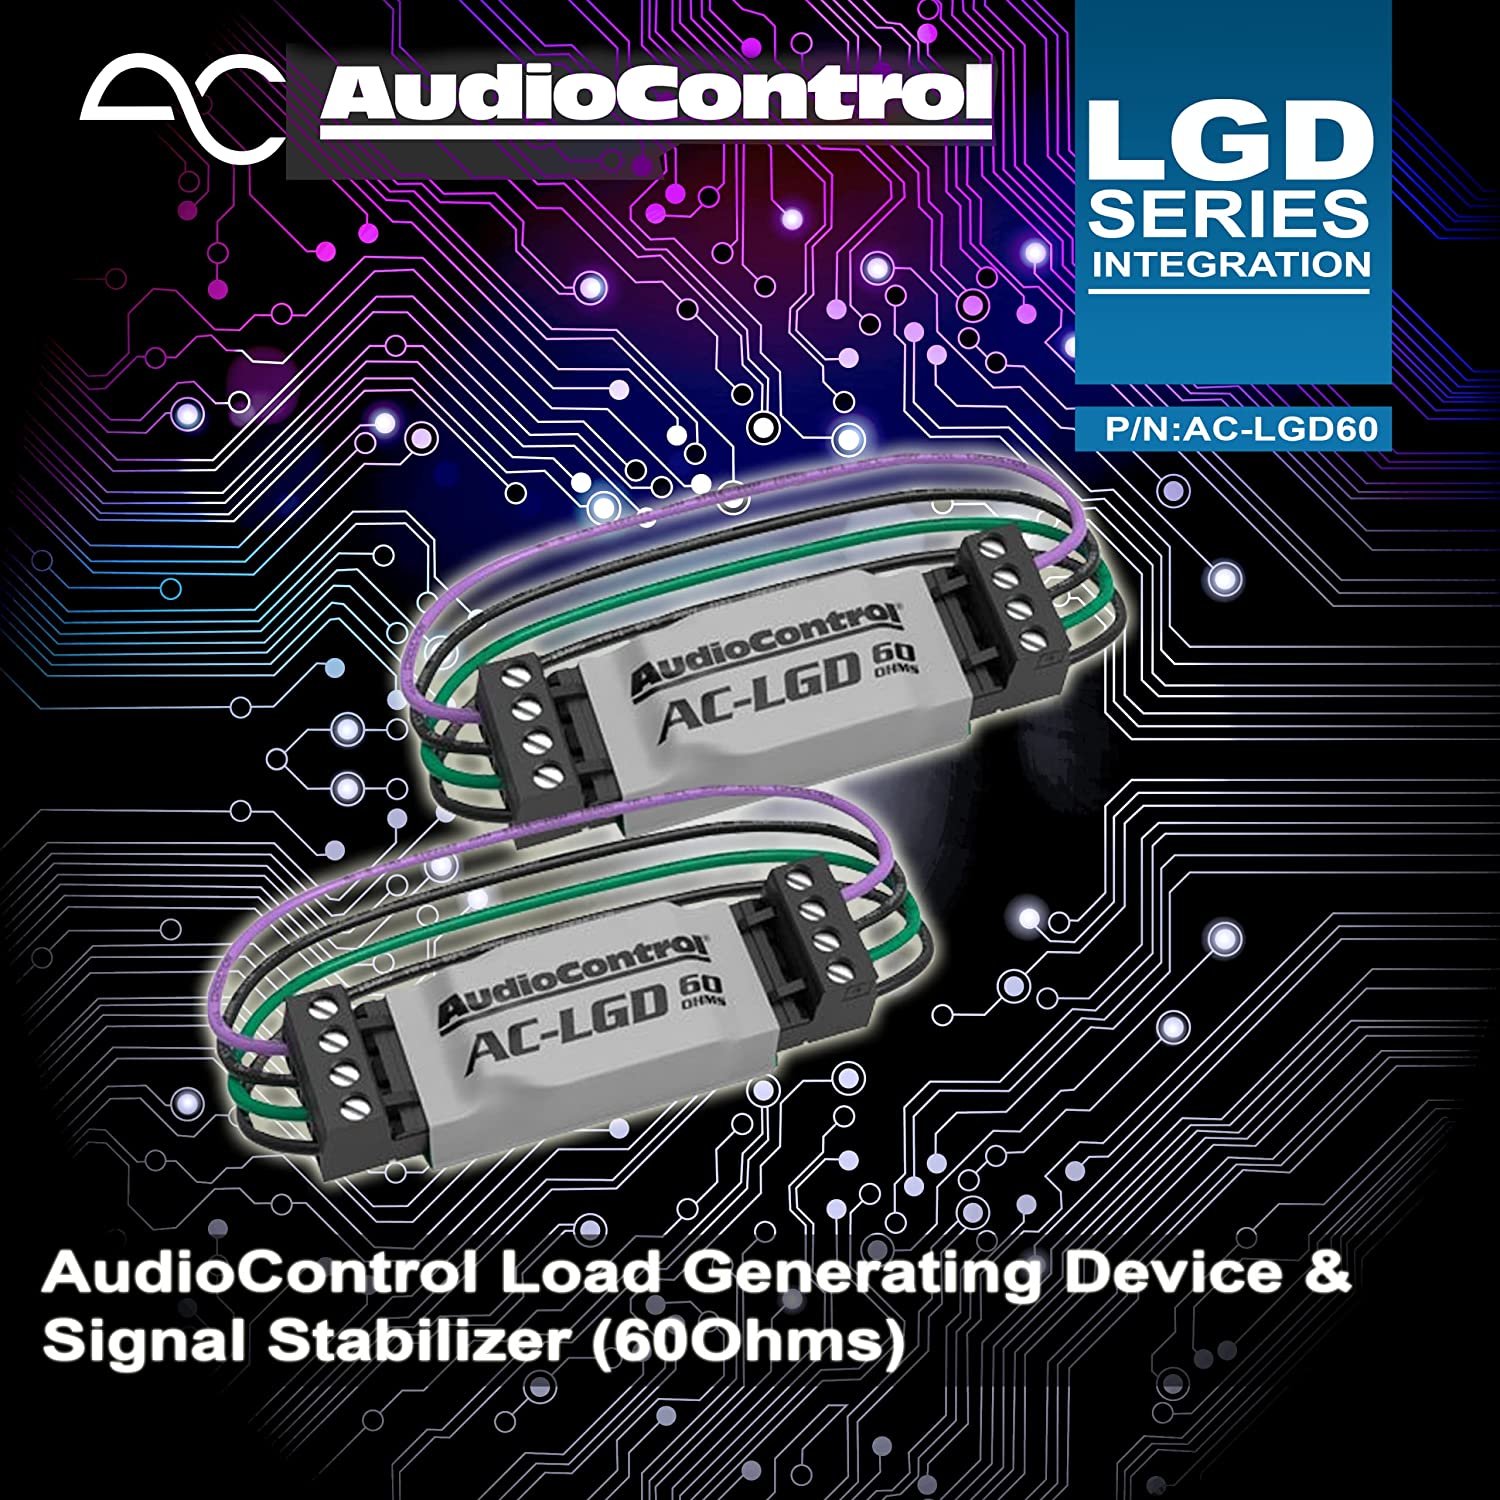 Audio Control AC-LGD 60 Load generating device & signal stabilizer for OEM Premium Amplified